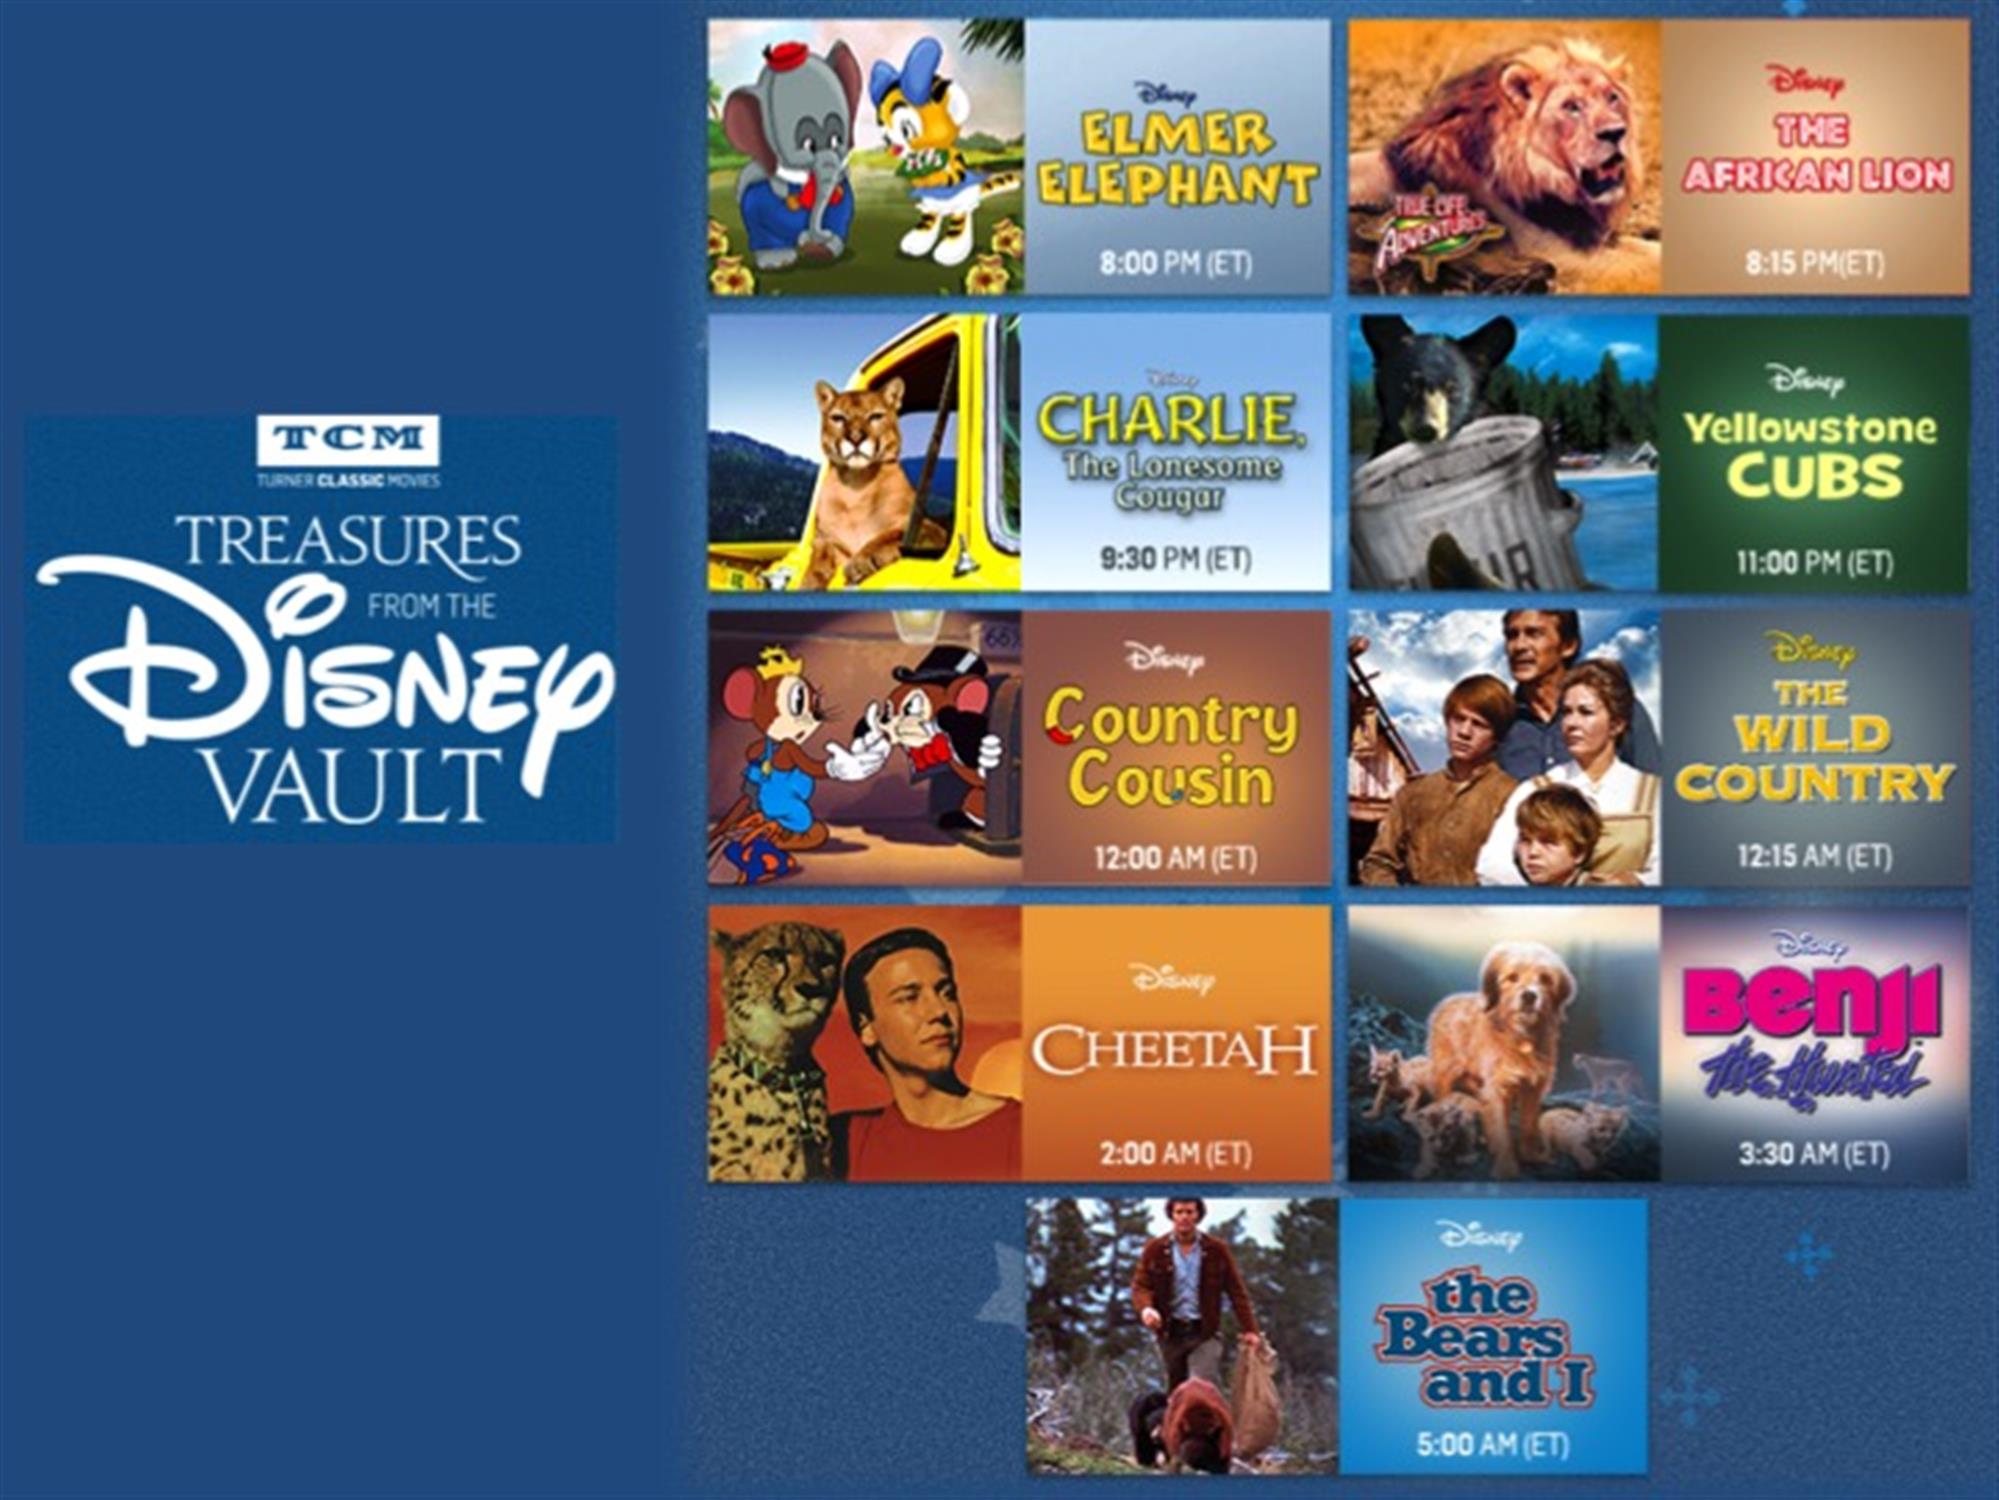 TCM Treasures from the Disney Vault - March 2019